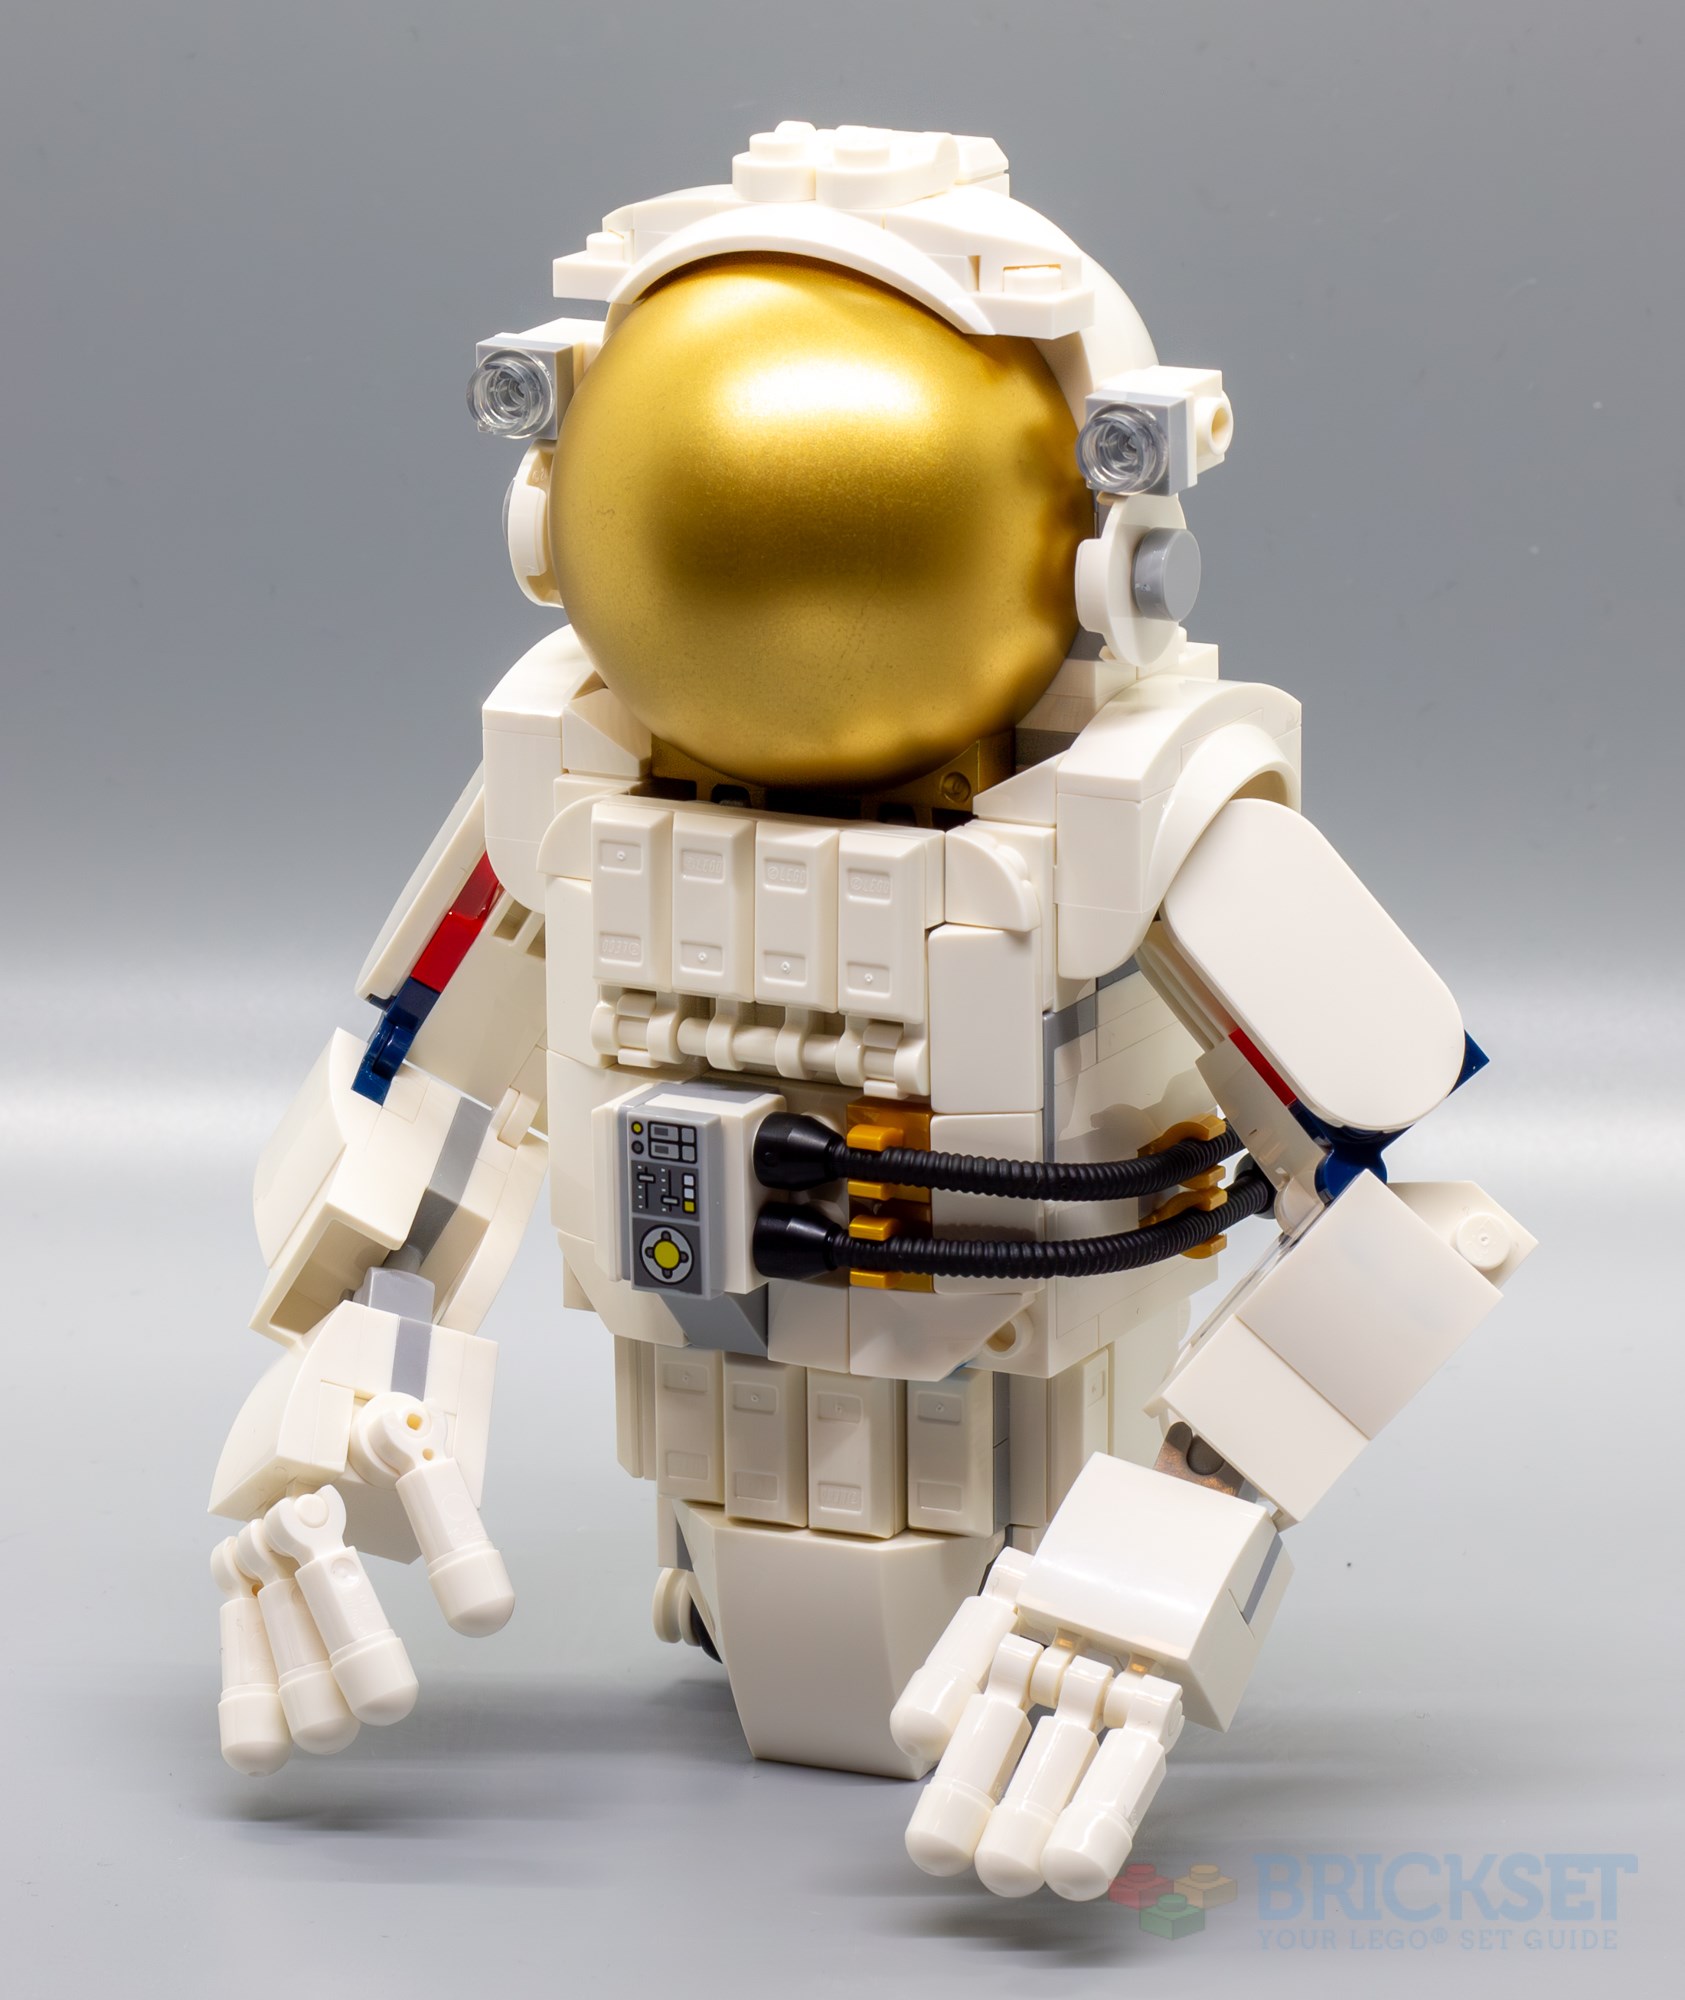 LEGO 31152 Space Astronaut review